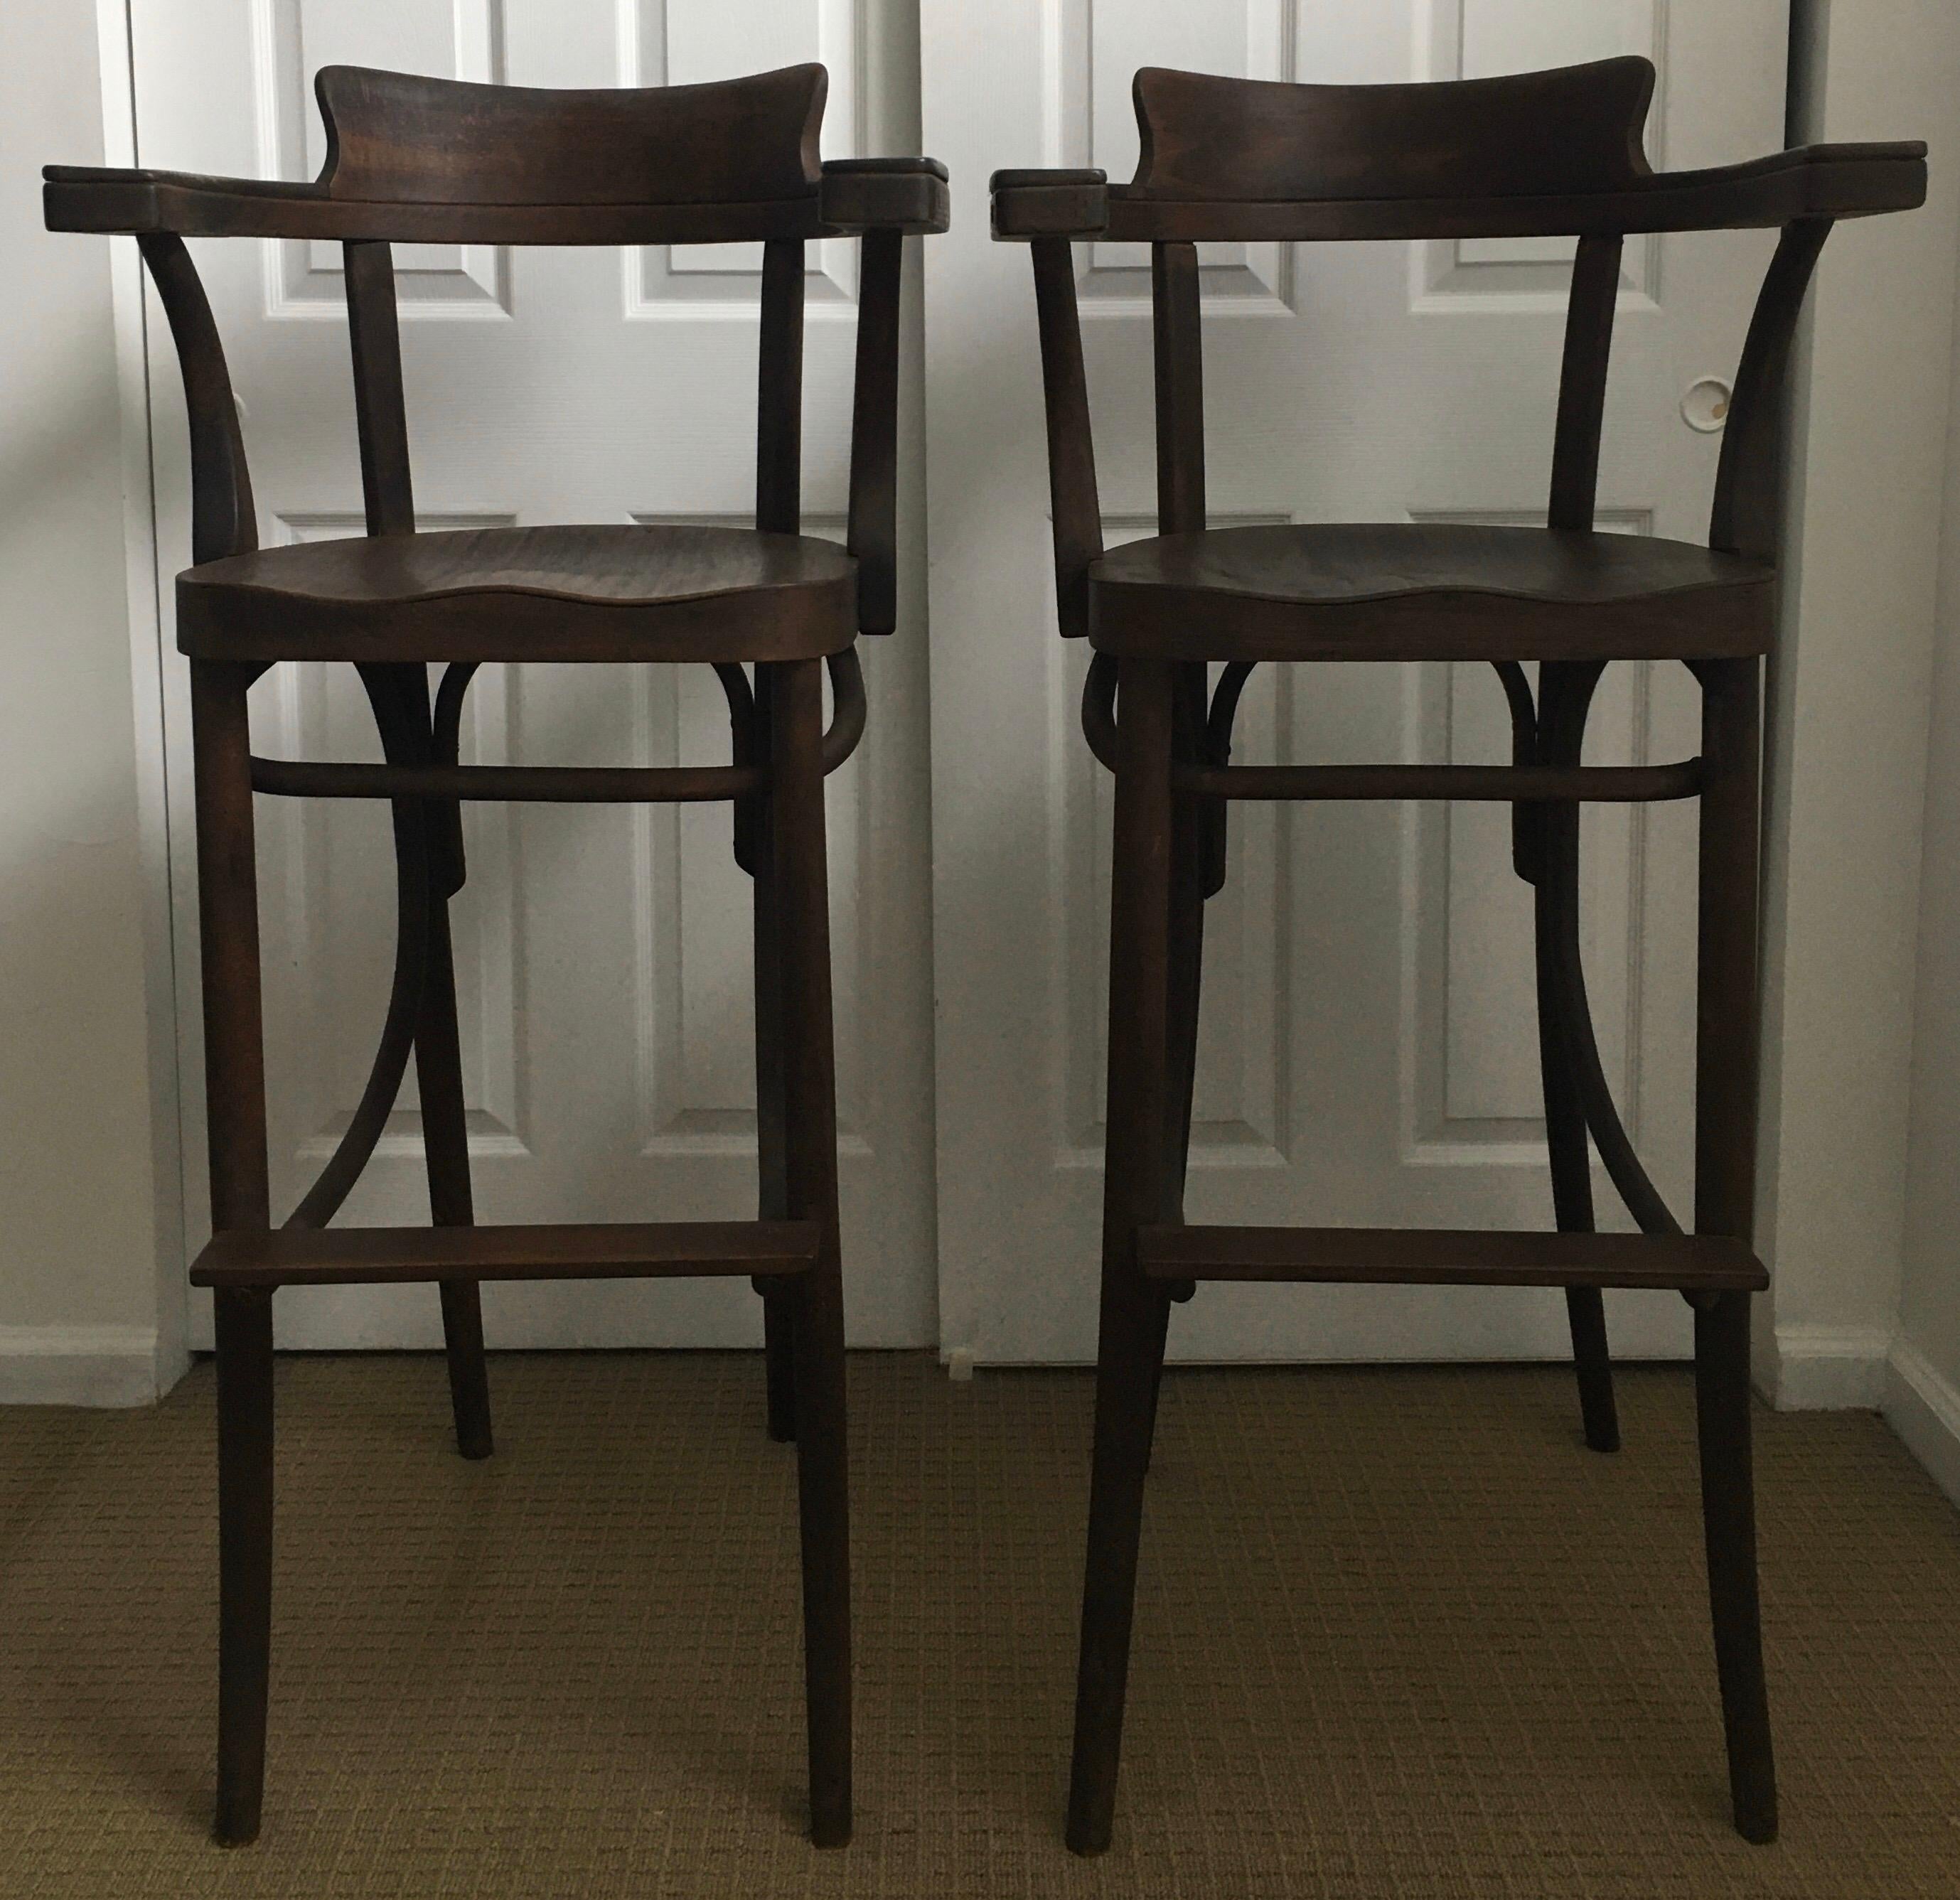 Set of two rare Czechoslovakian Mid-Century Modern Bentwood tall barstools. Sleek and sculptural bentwood Thonet style wood frames with original dark walnut finish patina. Features comfortable hand carved seats and arm rests. 

Made in